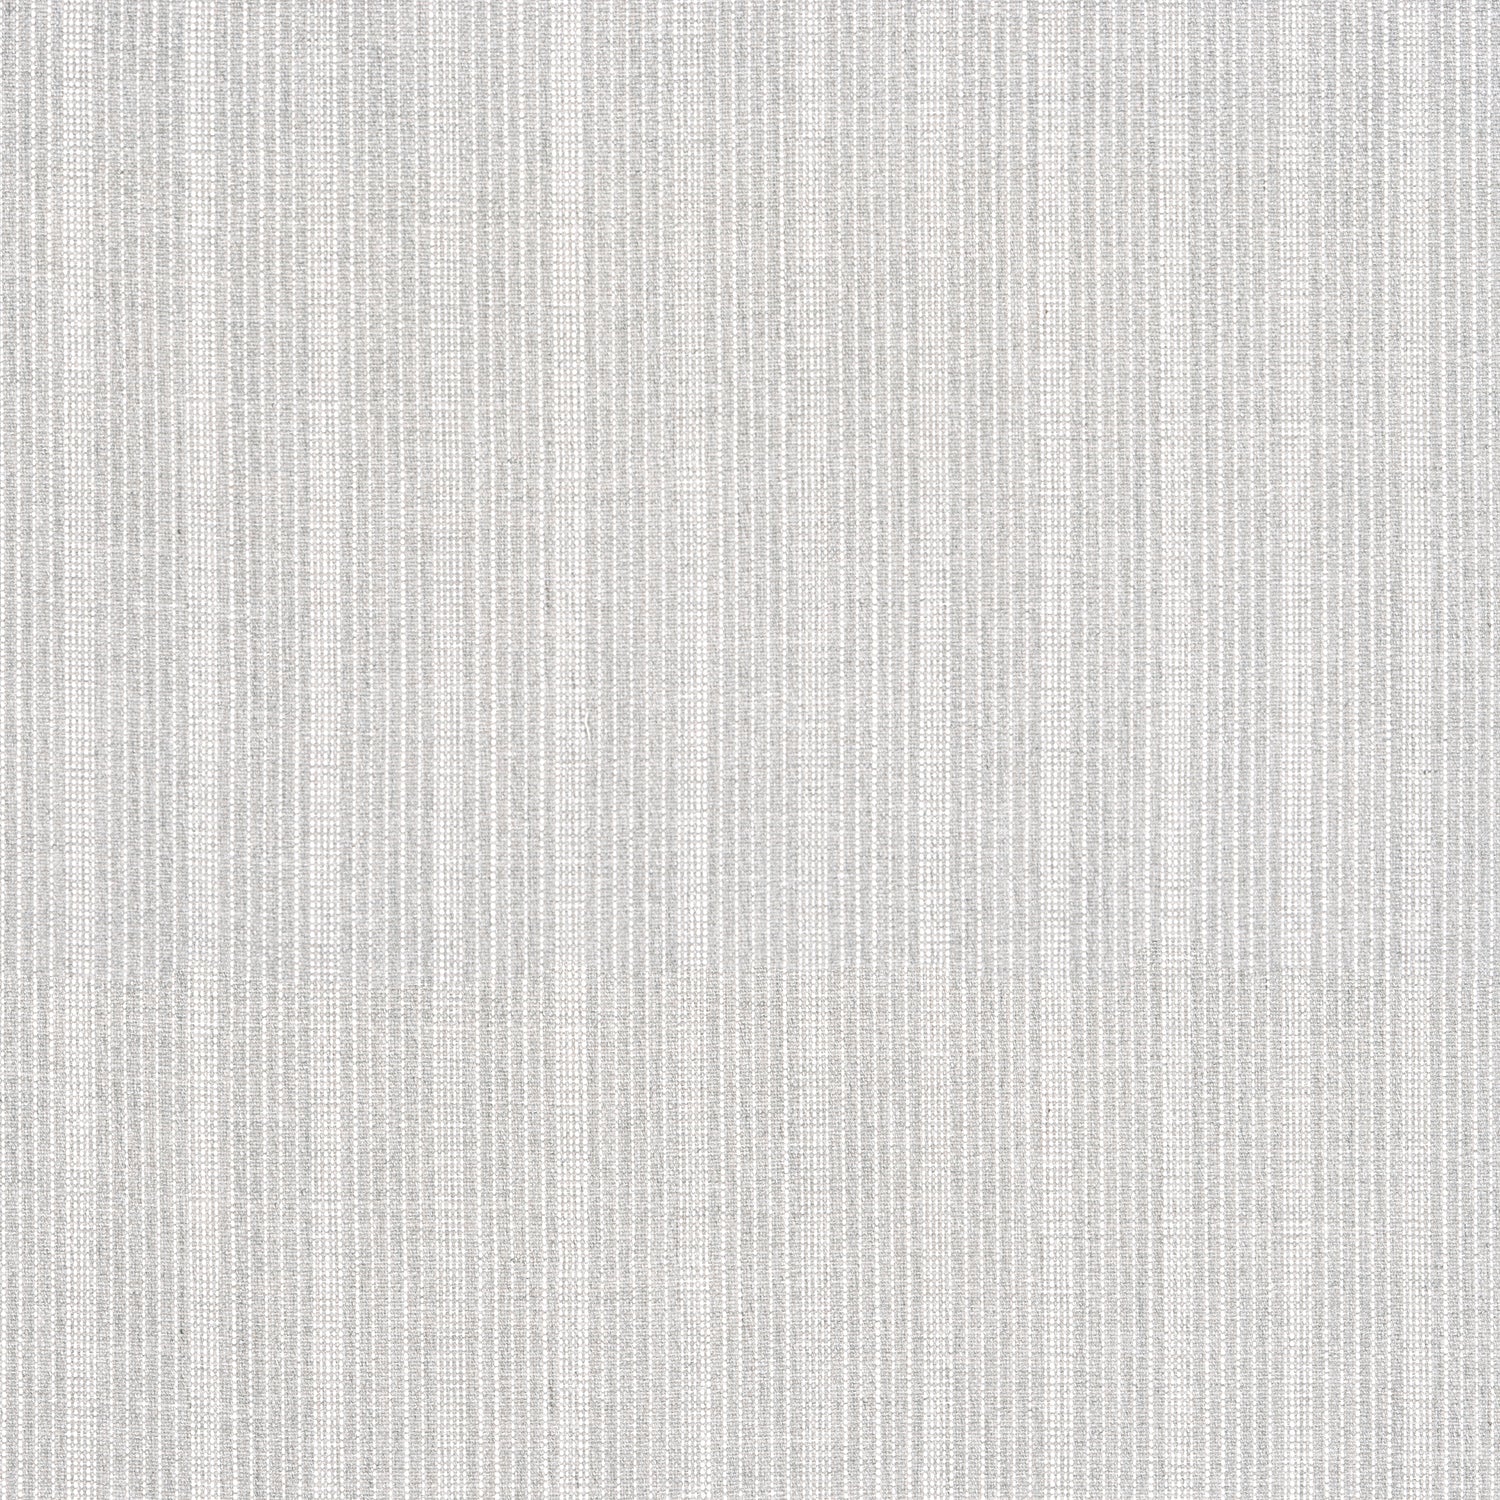 Ebro Stripe fabric in sterling color - pattern number W8507 - by Thibaut in the Villa collection